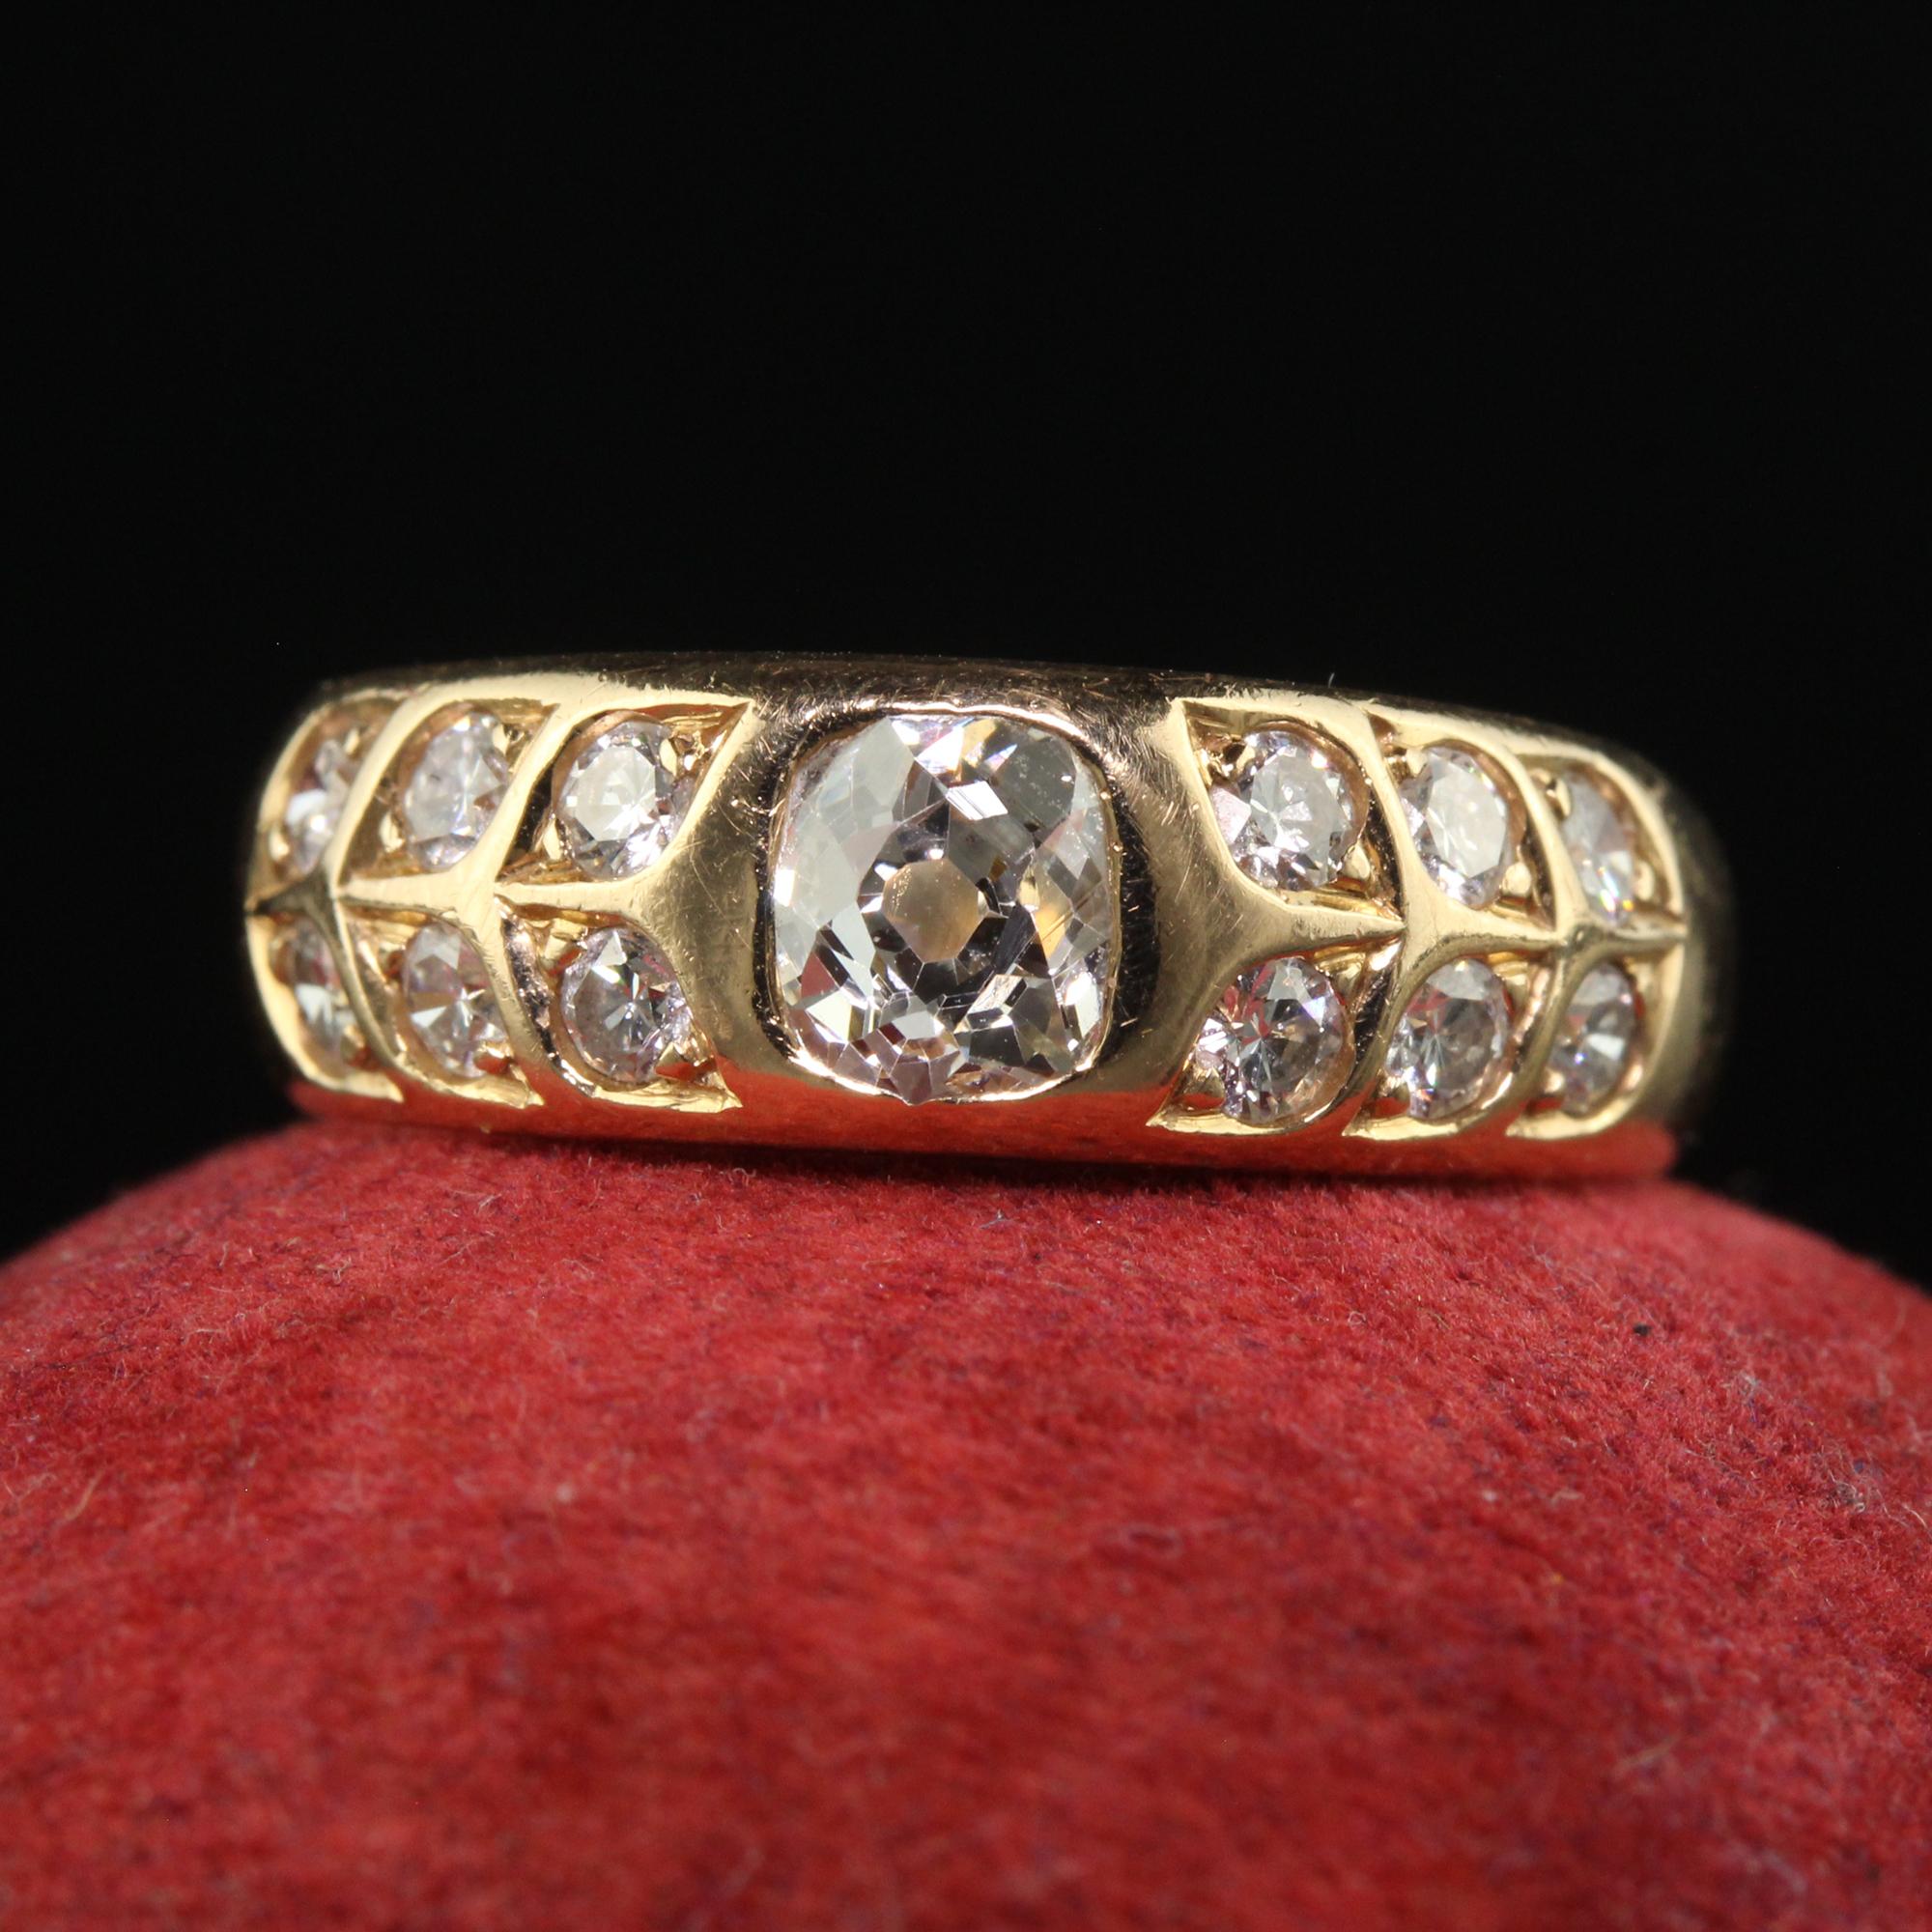 Beautiful Antique Art Deco 18K Yellow Gold French Old Mine Diamond Band Ring. This beautiful French art deco diamond ring is crafted in 18k yellow gold. The center holds a gorgeous old mine cut diamond and has two rows of old European cut diamonds